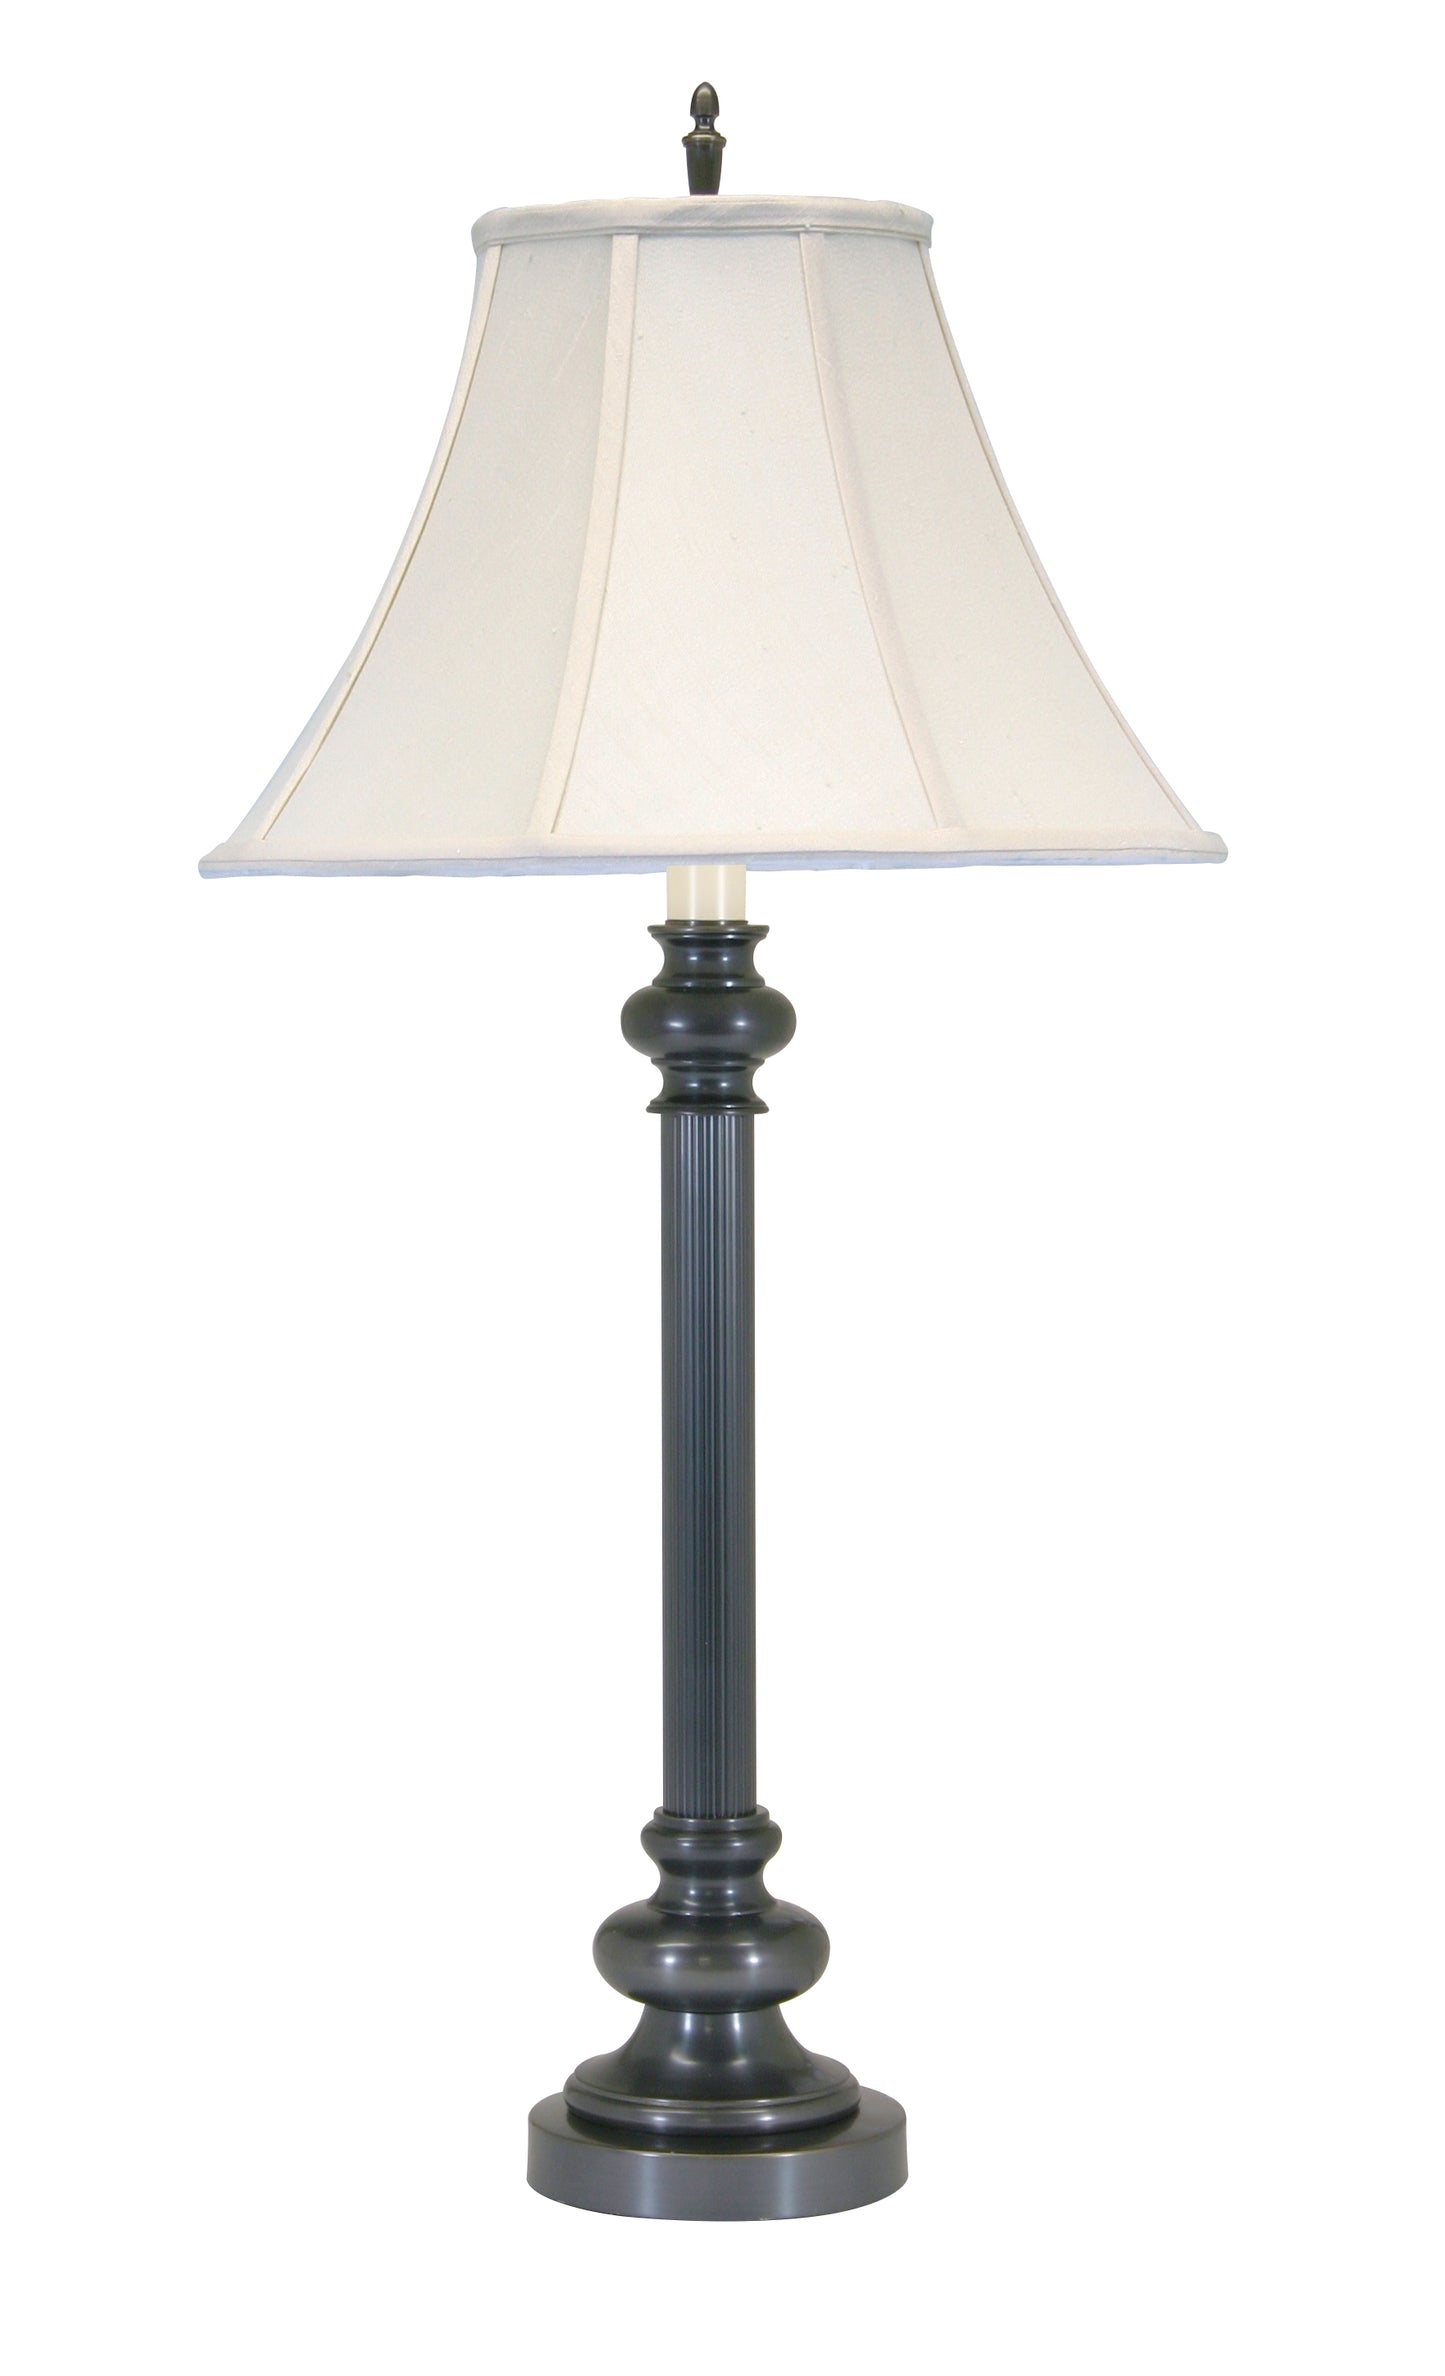 House of Troy Newport 30.75" Oil Rubbed Bronze Table Lamp N652-OB